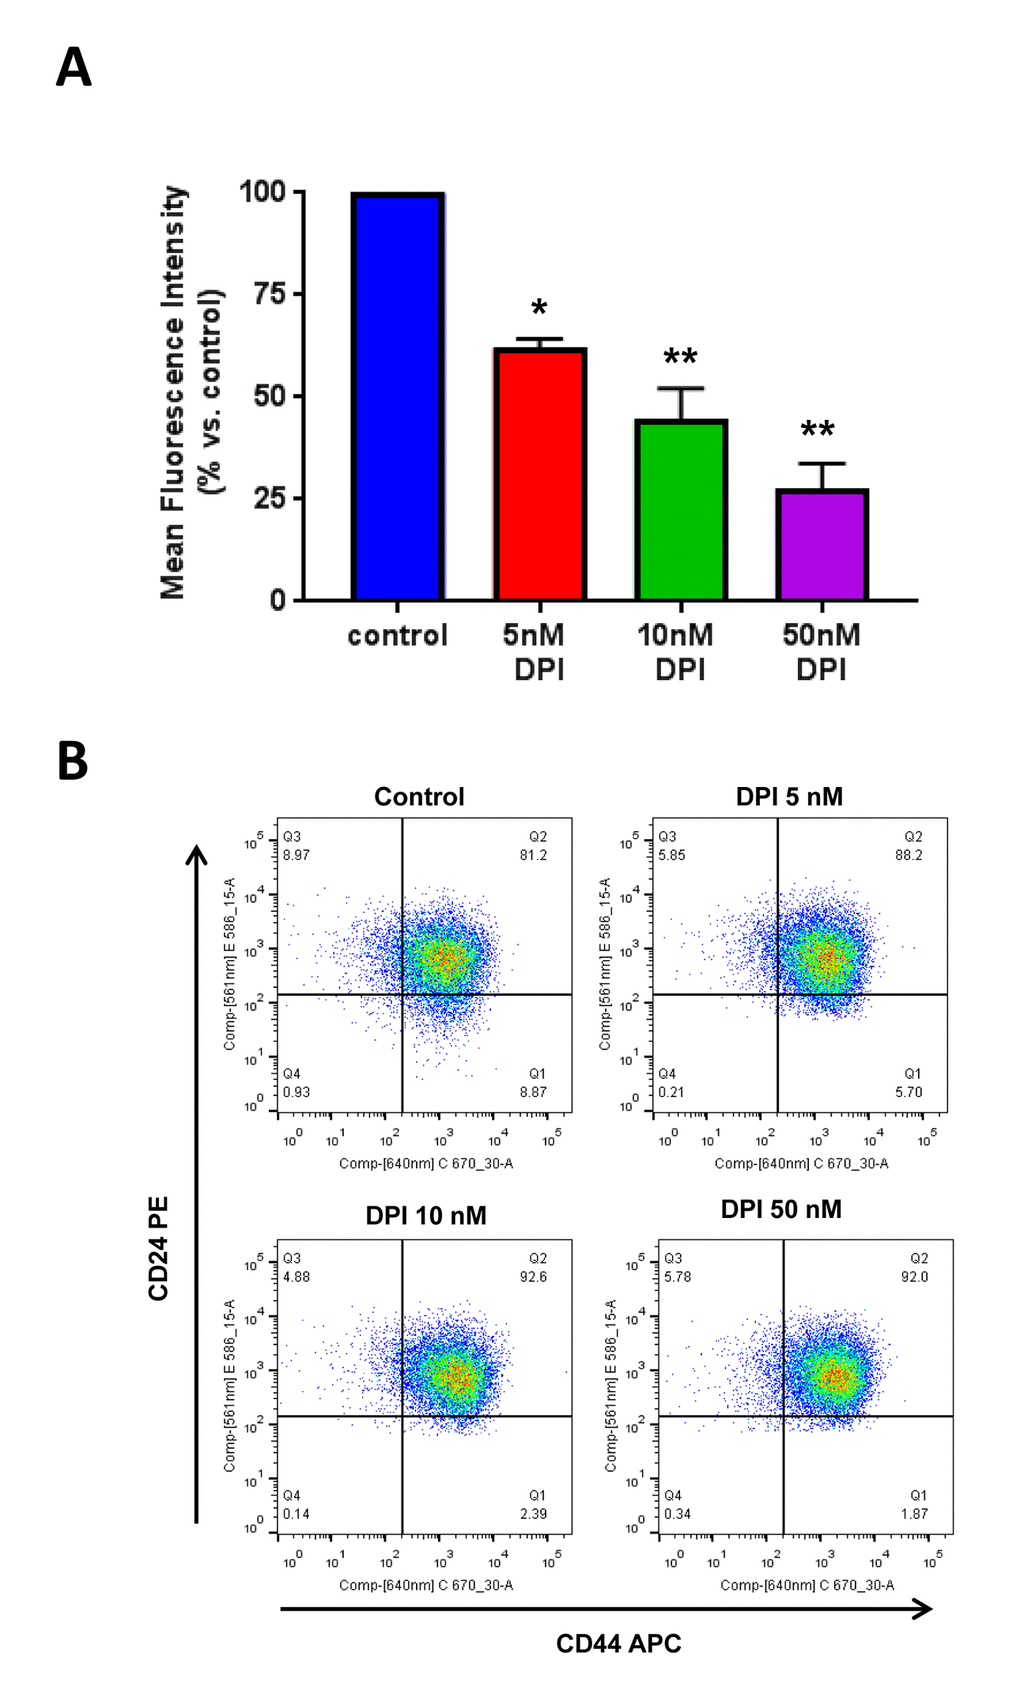 DPI selectively eliminates CSCs from the total cell population. MCF7 cells were cultured for 5 days as monolayers, in the presence of DPI (5, 10 and 50 nM). Then, the cells were harvested and subjected to FACS analysis to determine the levels of CSC markers. Panel (A) shows that the CD44+/CD24- cell population (which serves as a marker for breast CSCs) is dose-dependently reduced by DPI treatment, with an IC-50 of 10 nM. Panel (B) contains dot plots showing the double fluorescent CD44+/CD24- FACS assay. Note that the signal has significantly decreased in the lower right quadrant (Q1), after DPI treatment. * p